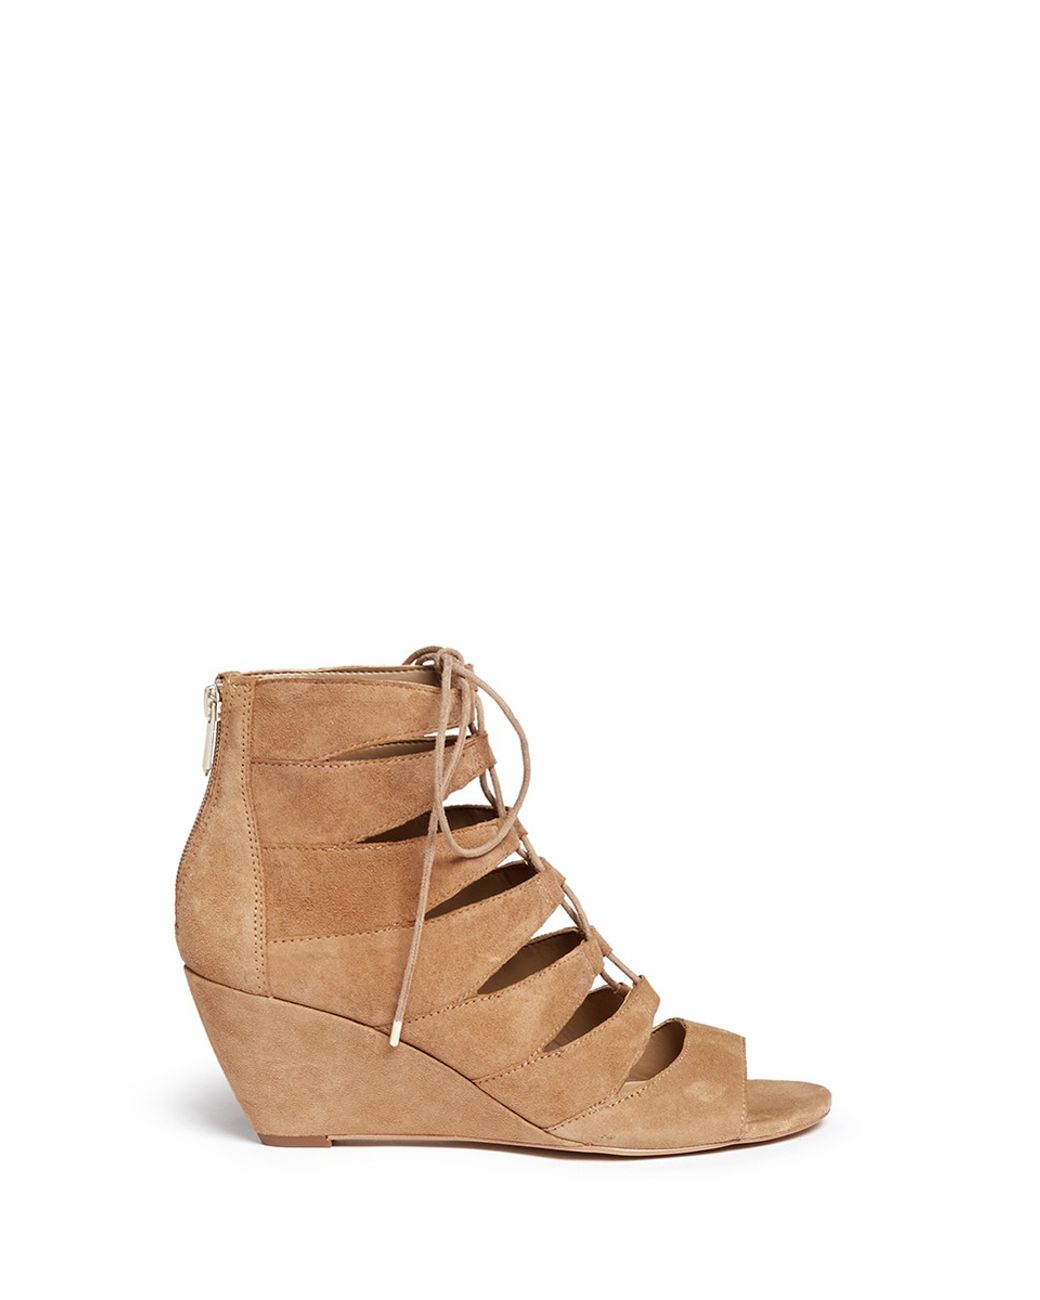 Sam Edelman 'santina' Caged Lace-up Suede Wedge Sandals in Oatmeal ...